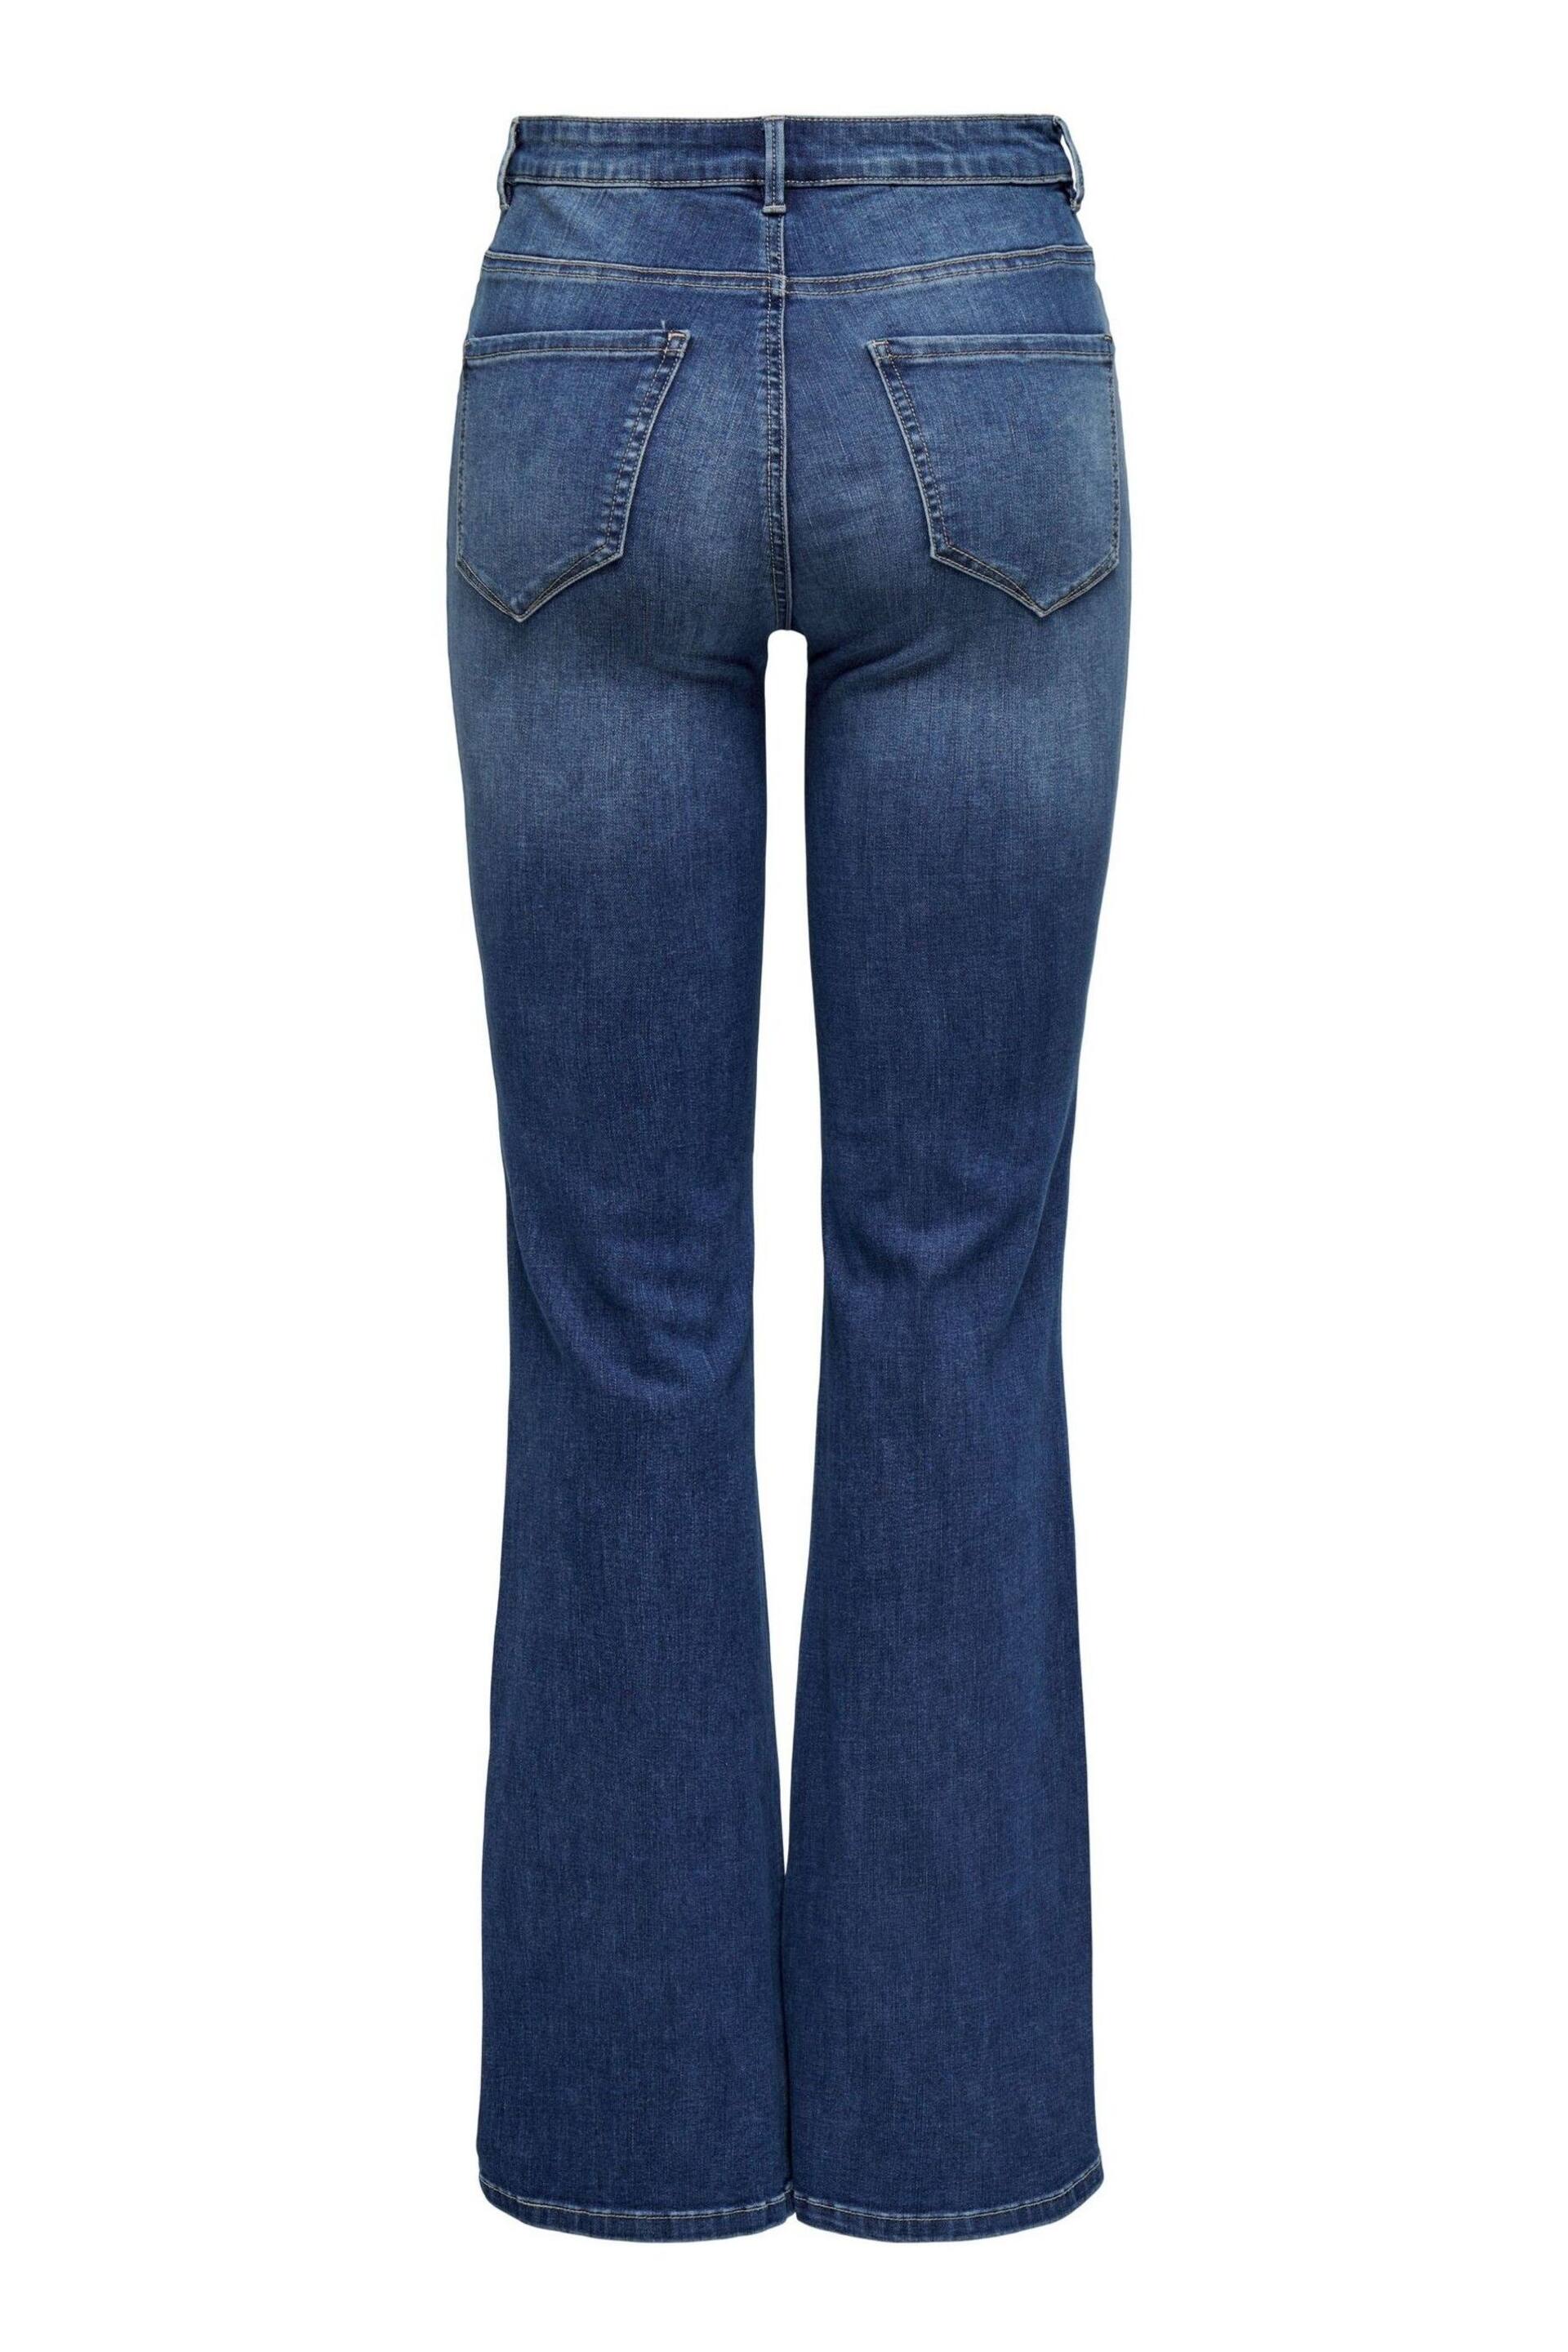 ONLY Blue High Waisted Flare Leg Rose Jeans - Image 8 of 8